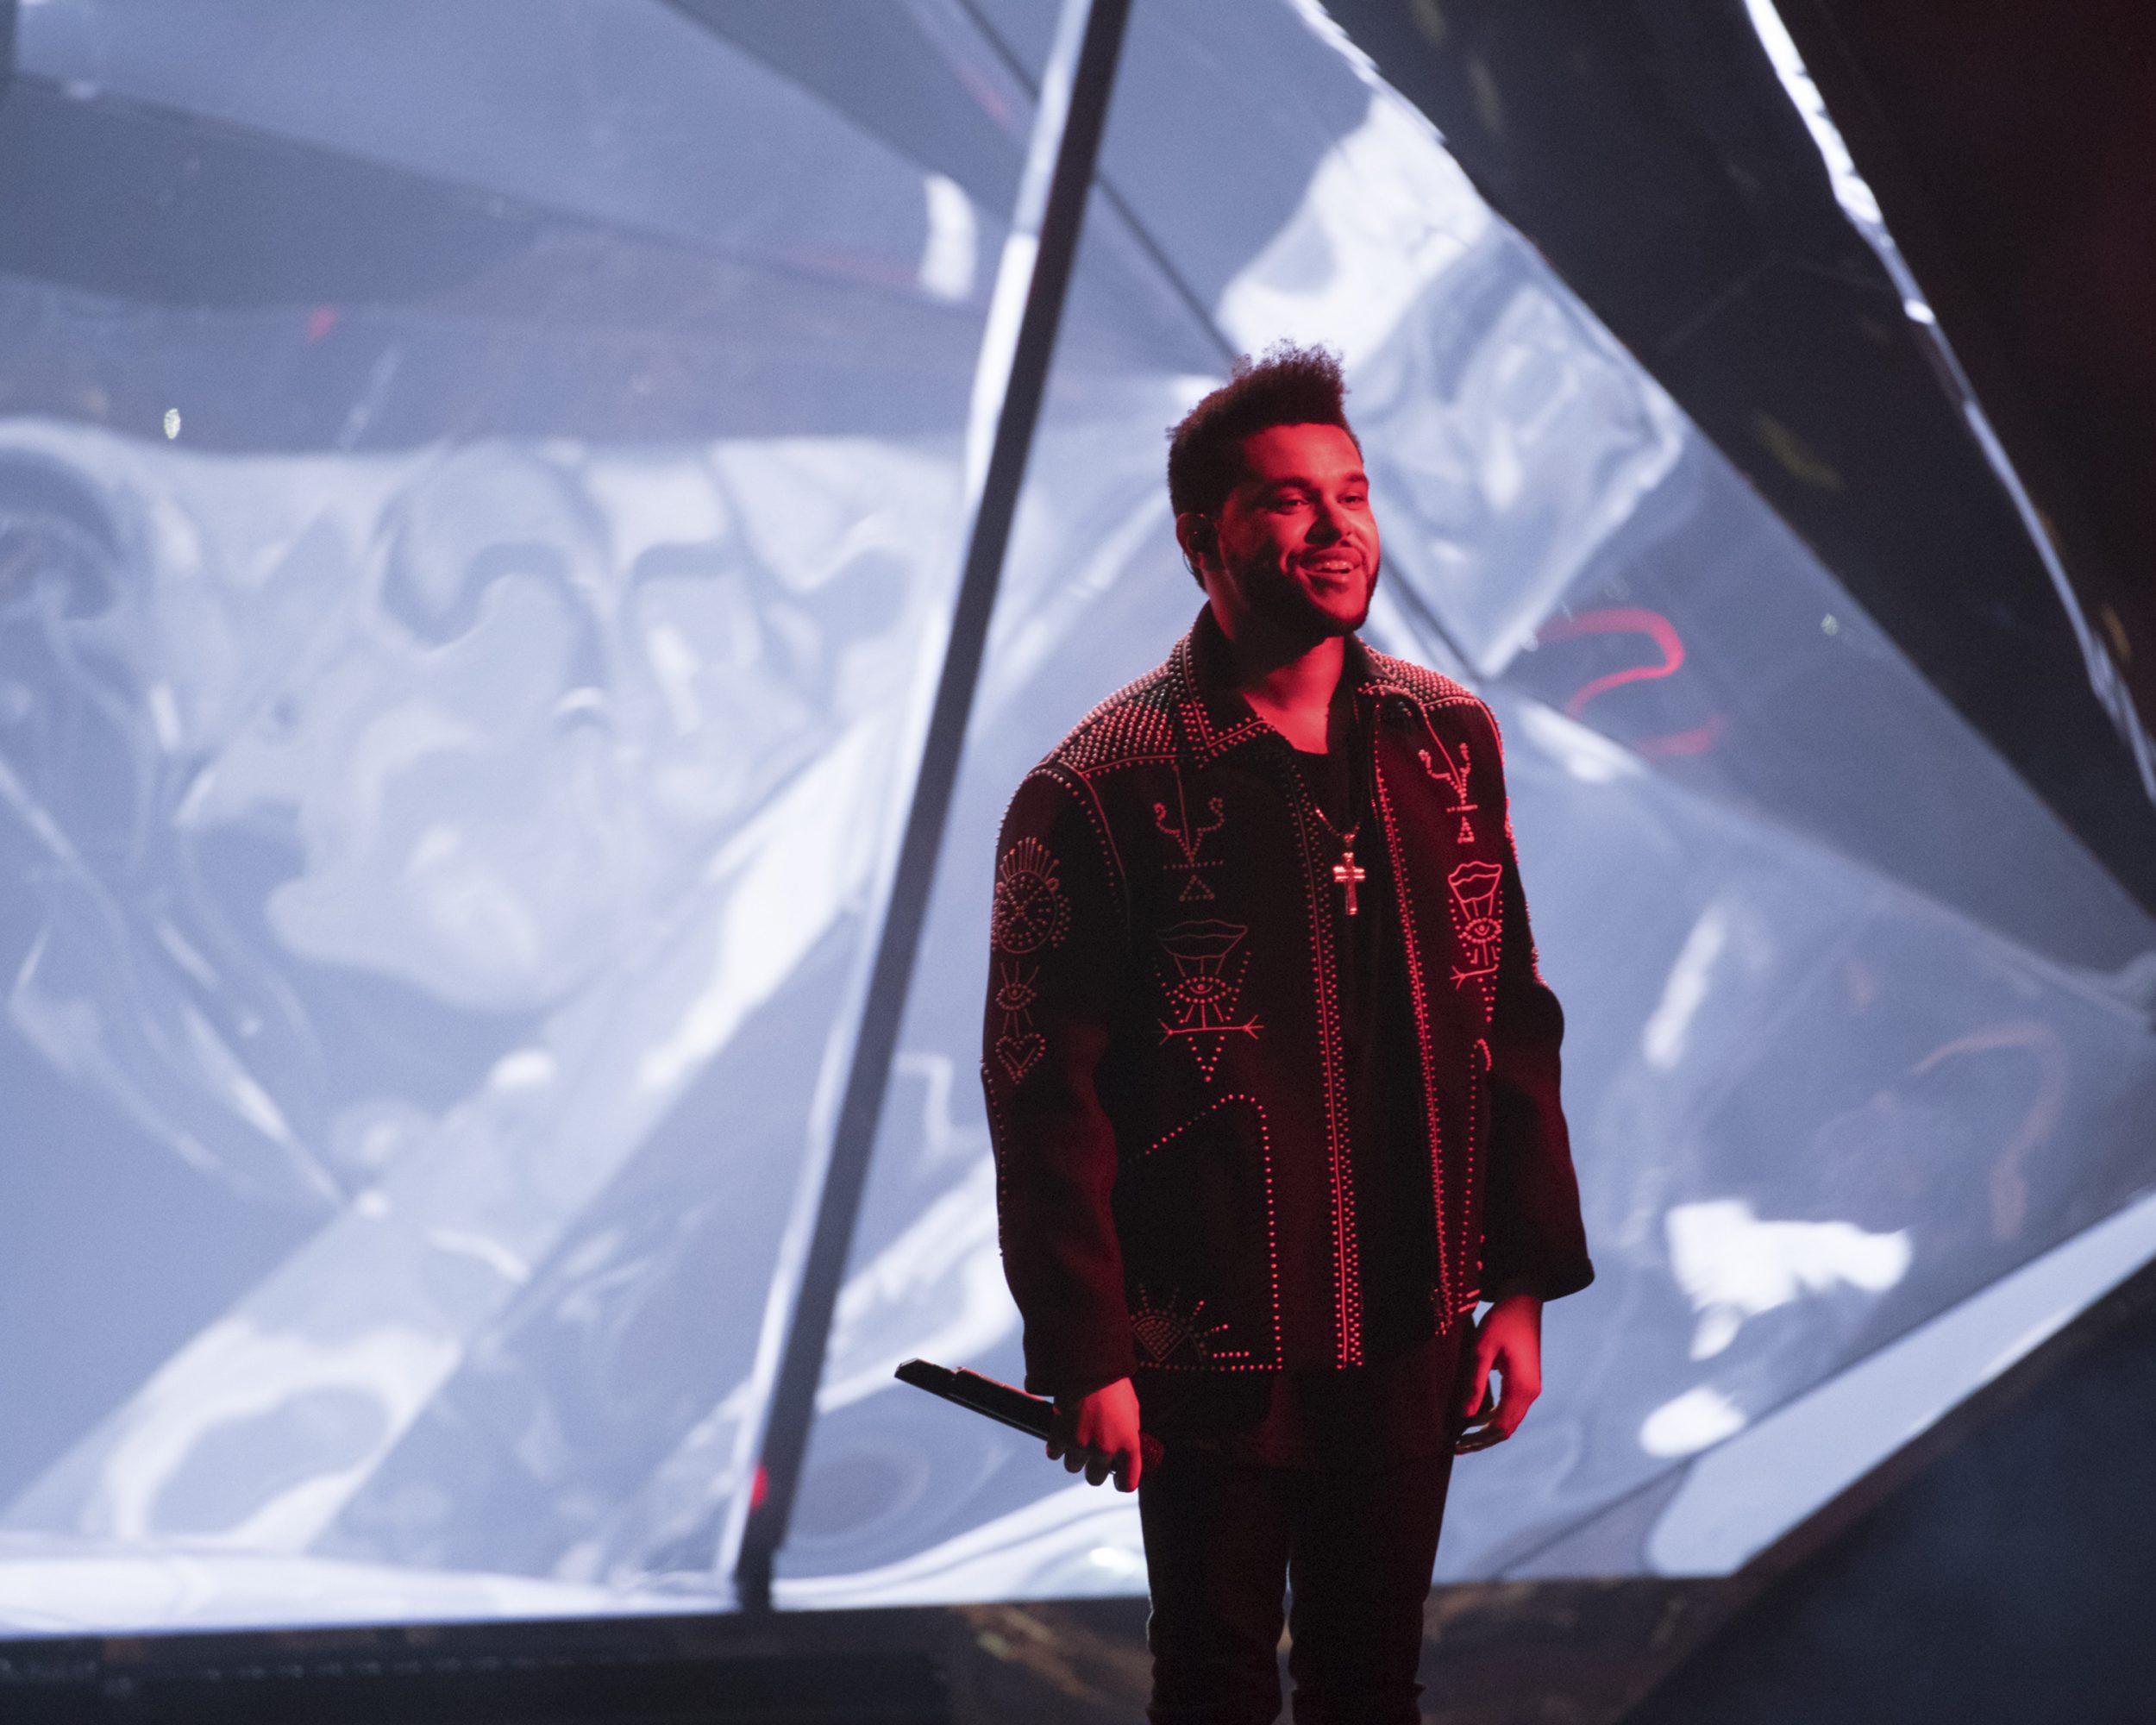 THE 2016 AMERICAN MUSIC AWARDS(r) - The “2016 American Music Awards,” the world’s biggest fan-voted award show, broadcasts live from the Microsoft Theater in Los Angeles on SUNDAY, NOVEMBER 20, at 8:00 p.m. EST, on ABC. (Image Group LA/ABC) THE WEEKND